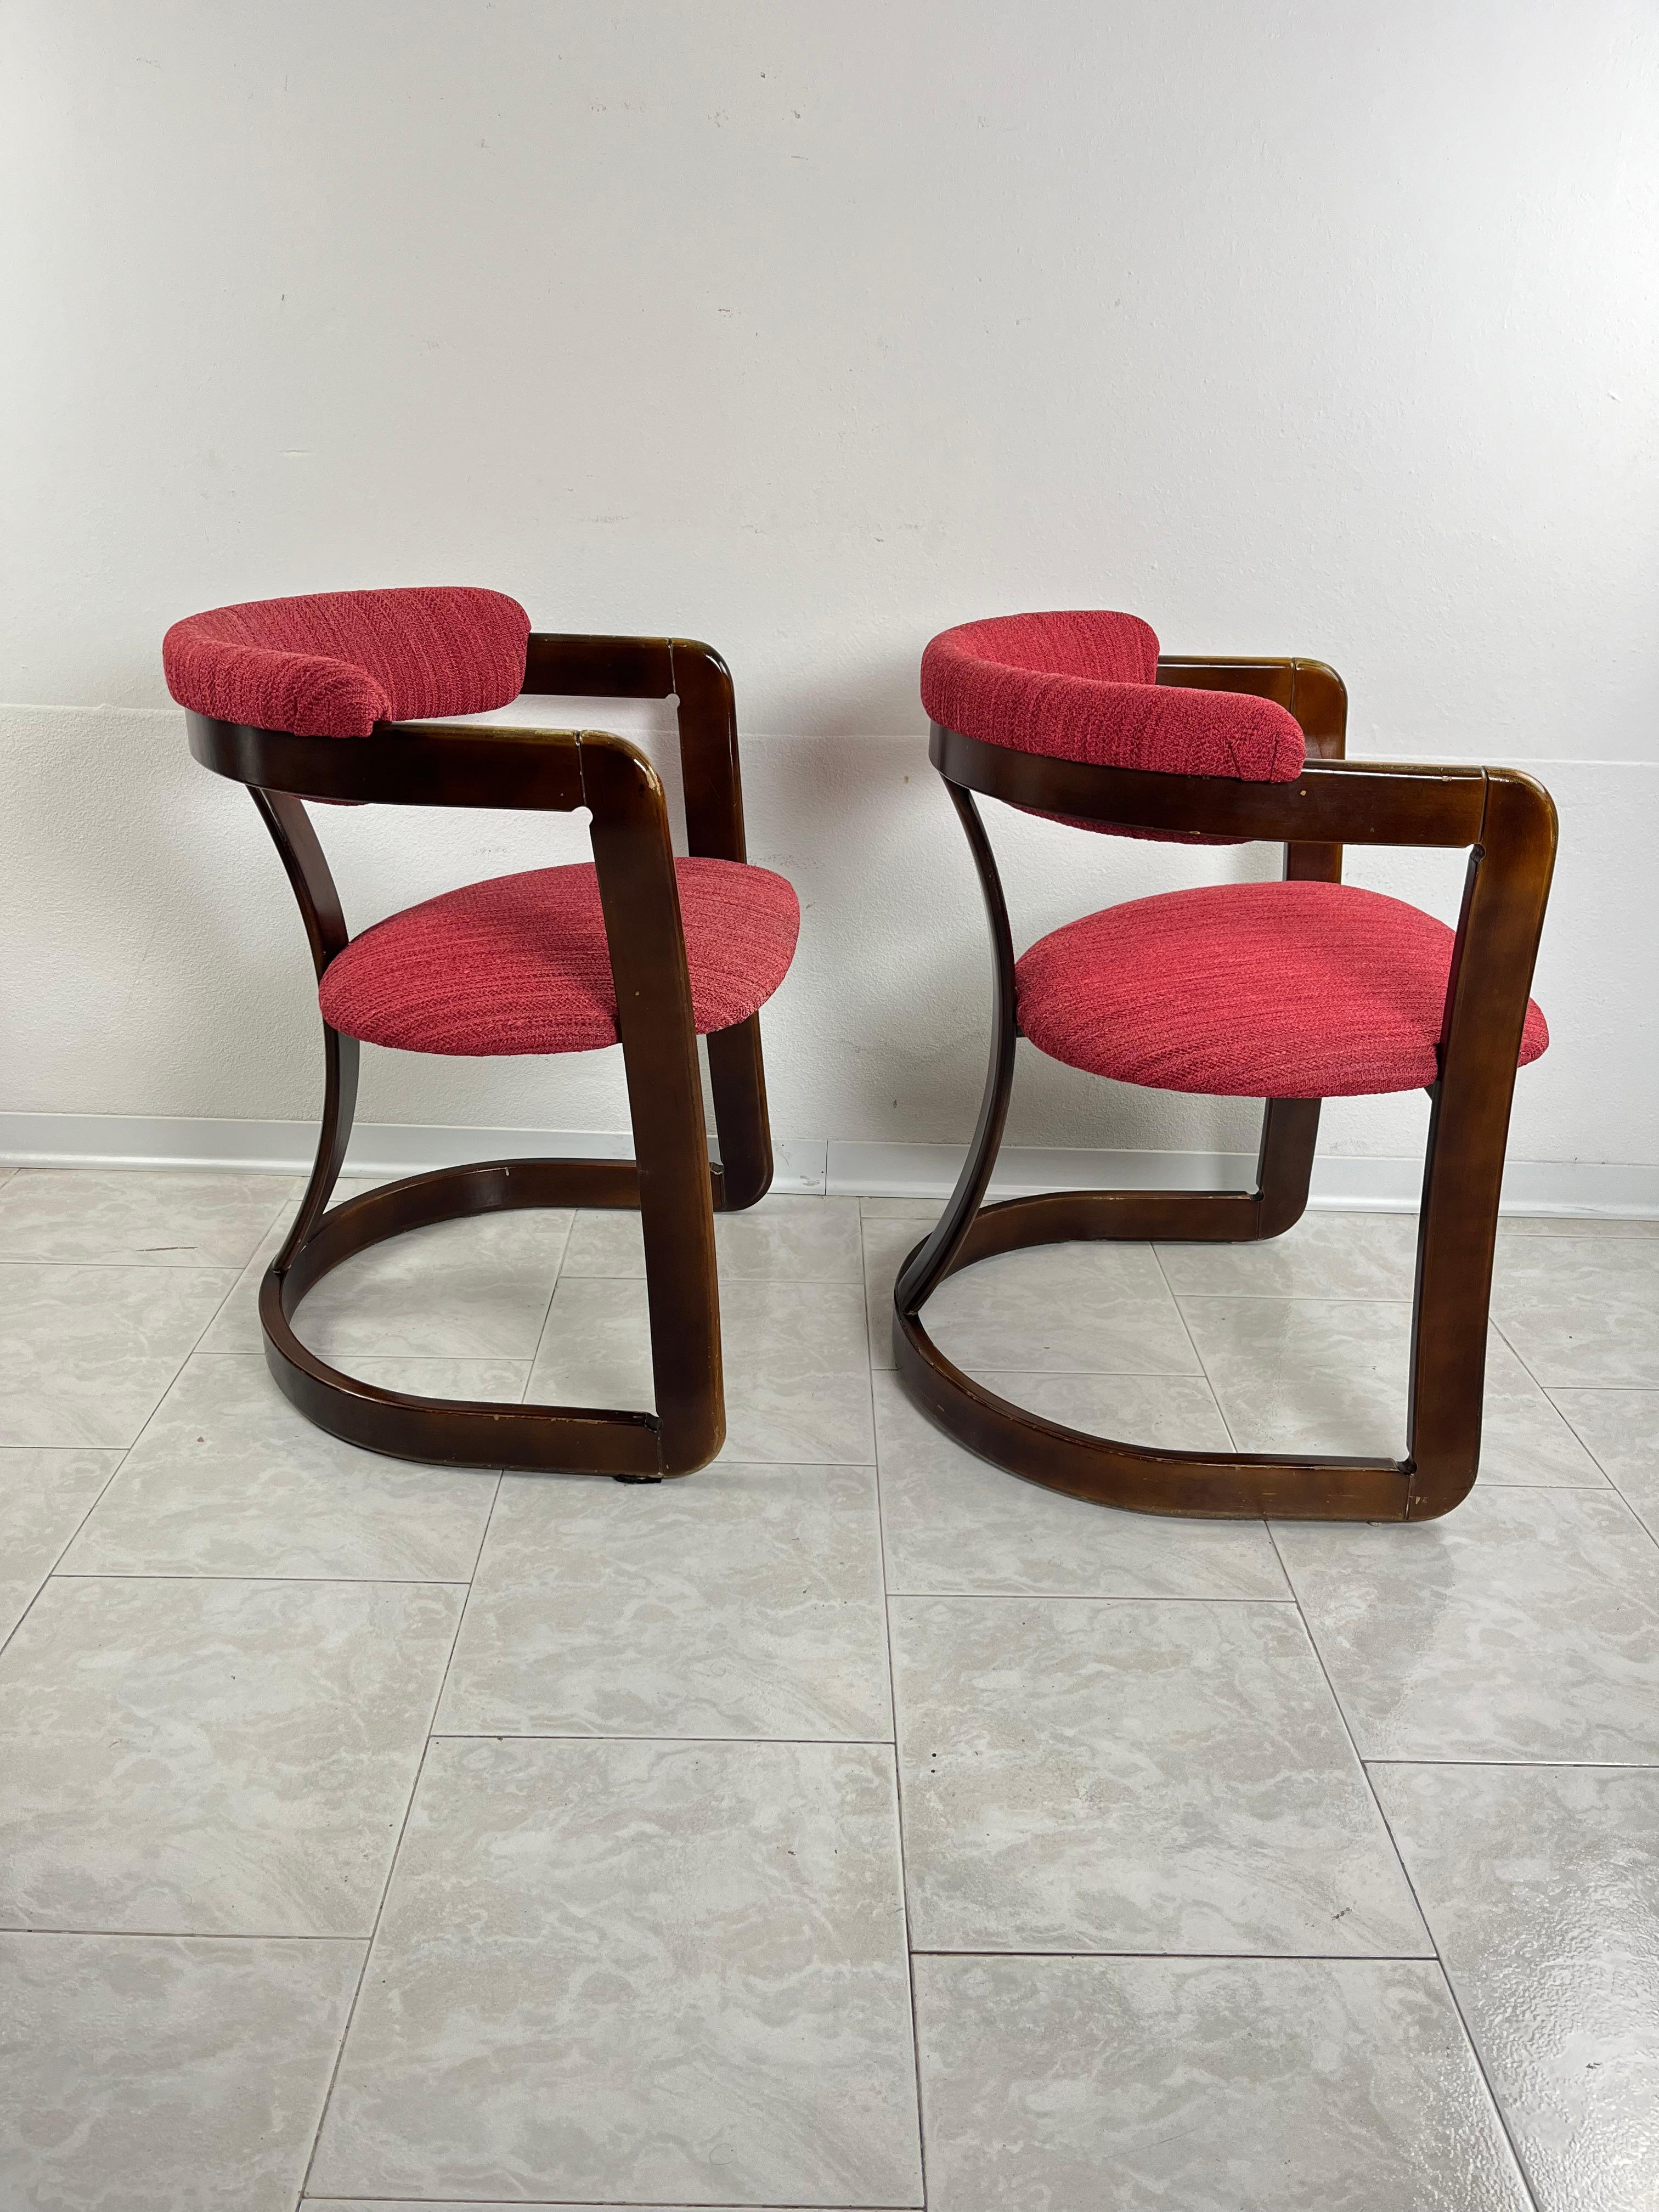 Italian Set of 2 Mid-Century Curved Wooden Chairs Attributed to A. & P. Castiglioni For Sale